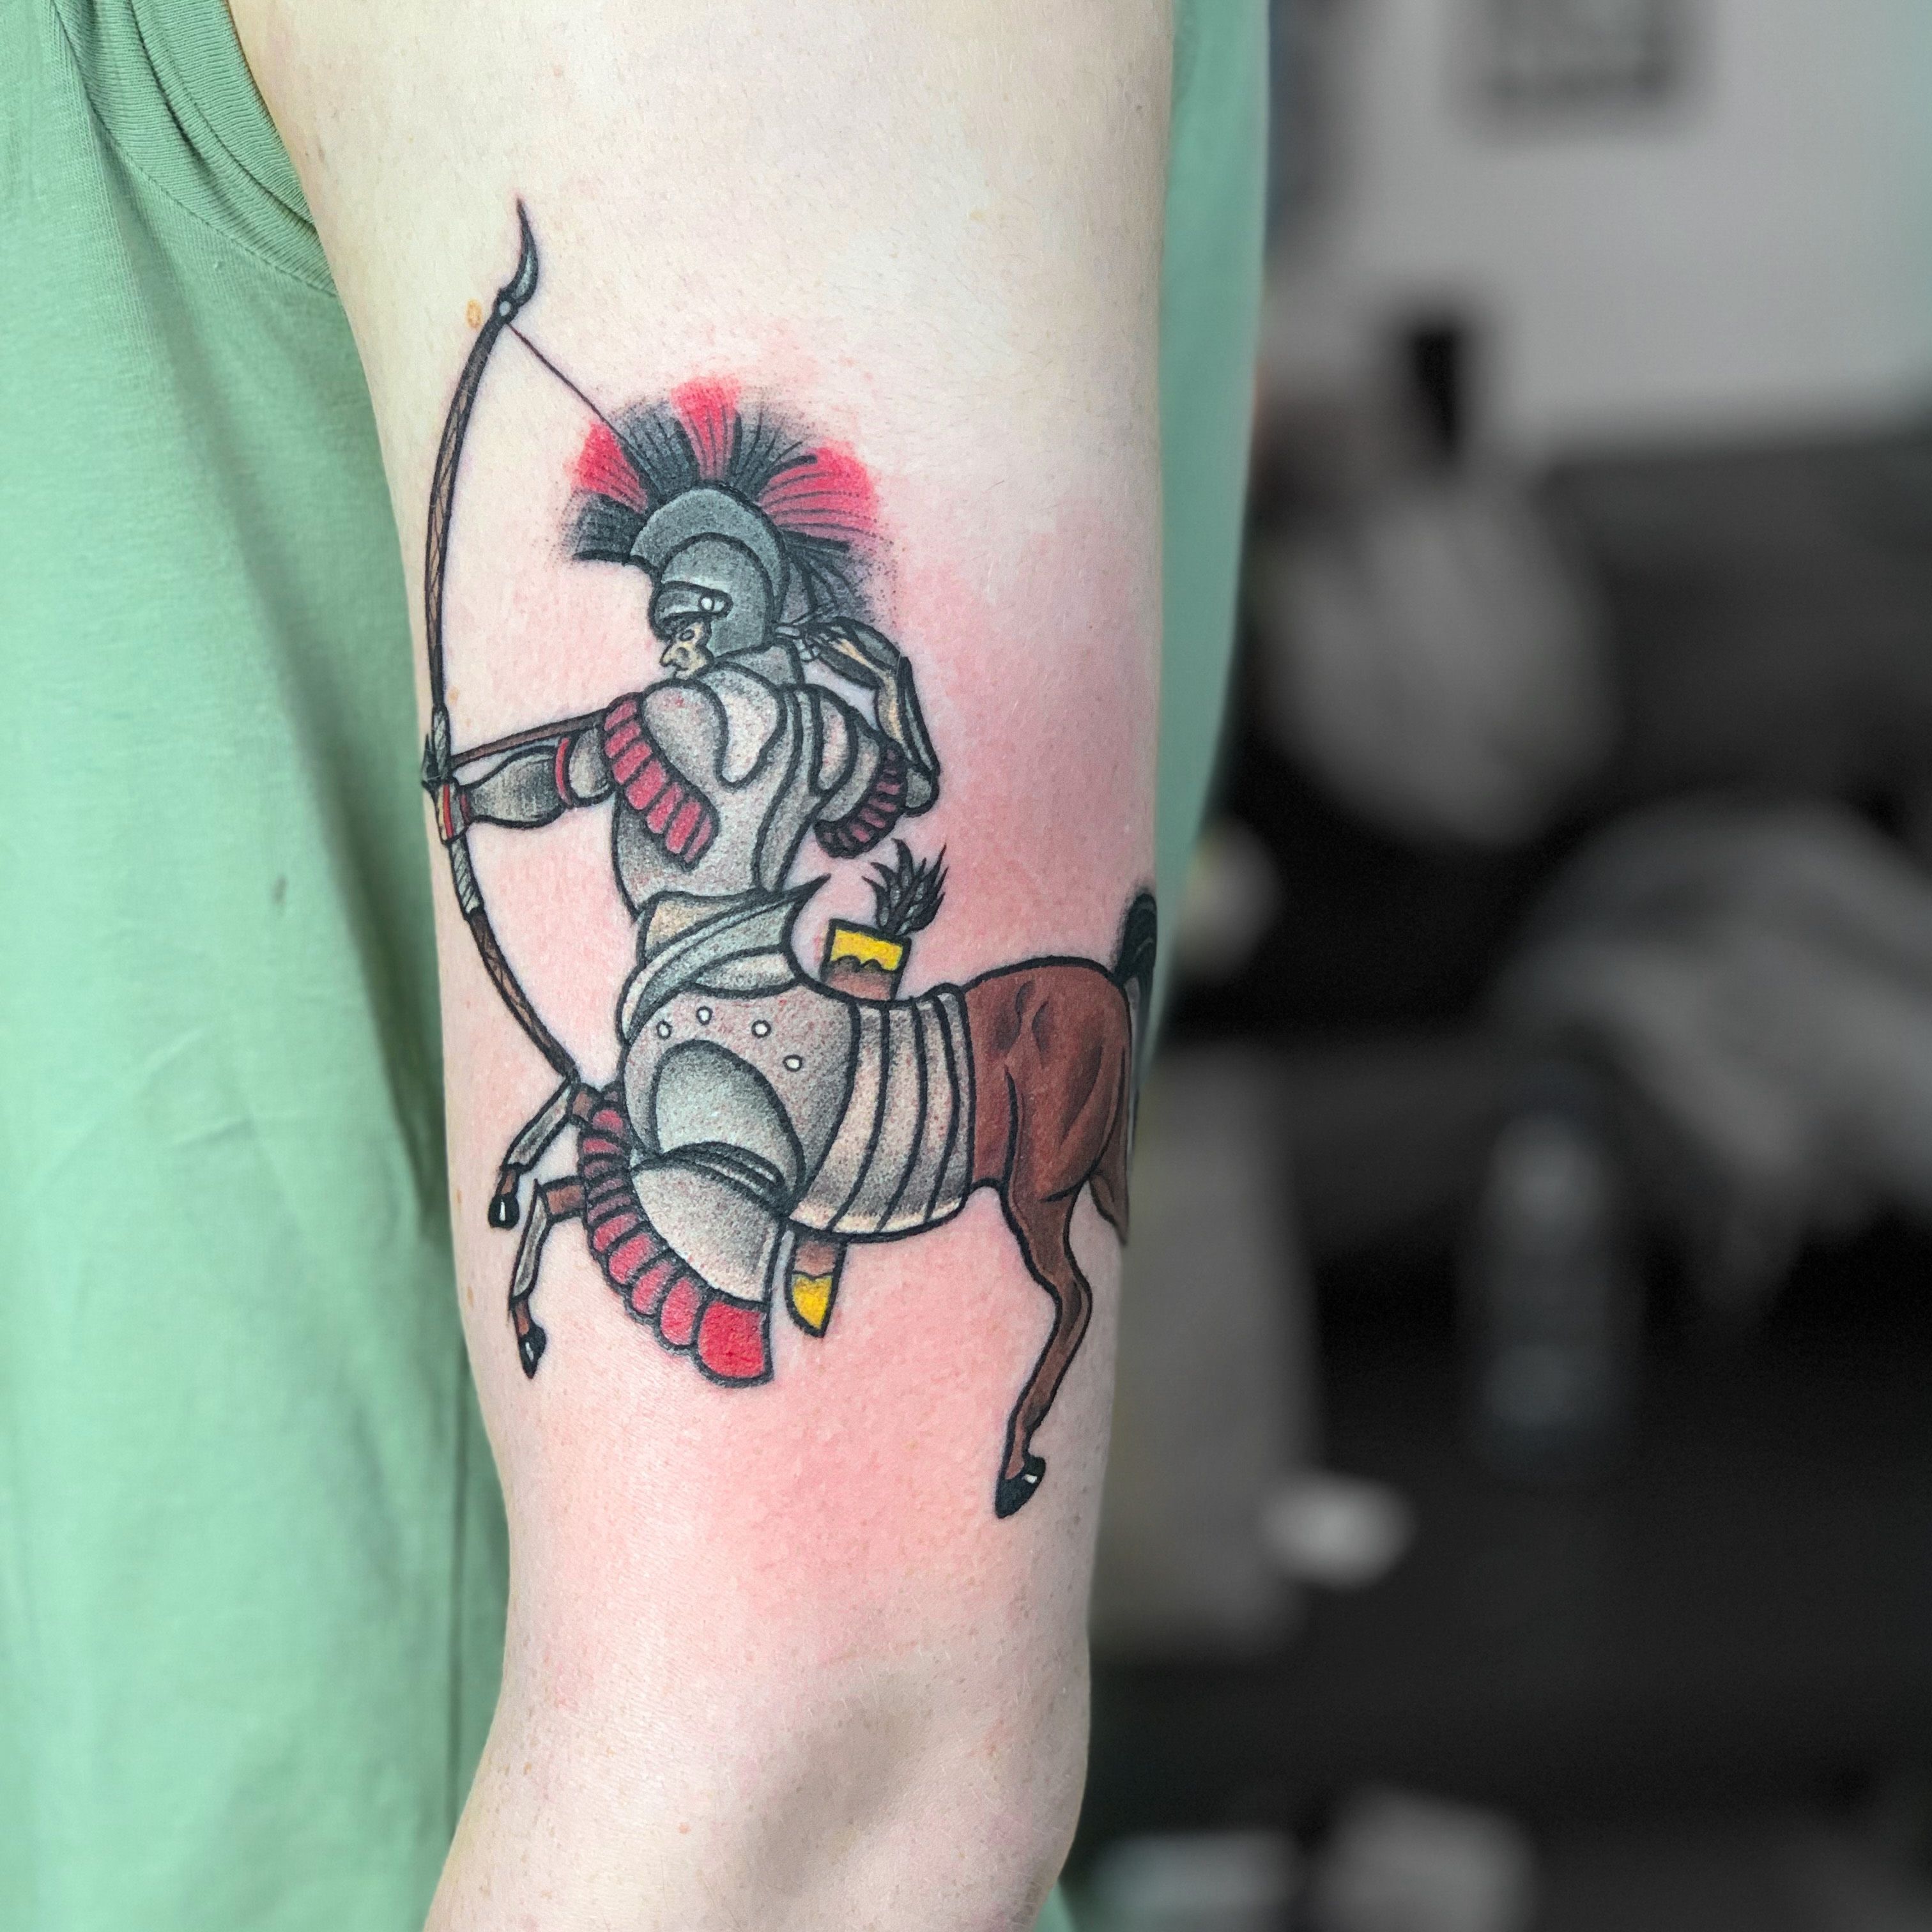 Sagittarius star sign Centaur tattoo. Heaps of meaning and she loves it.  Love doing these sort of tattoos. Greek gods. Amaizing | By Manik'z -  InkFacebook